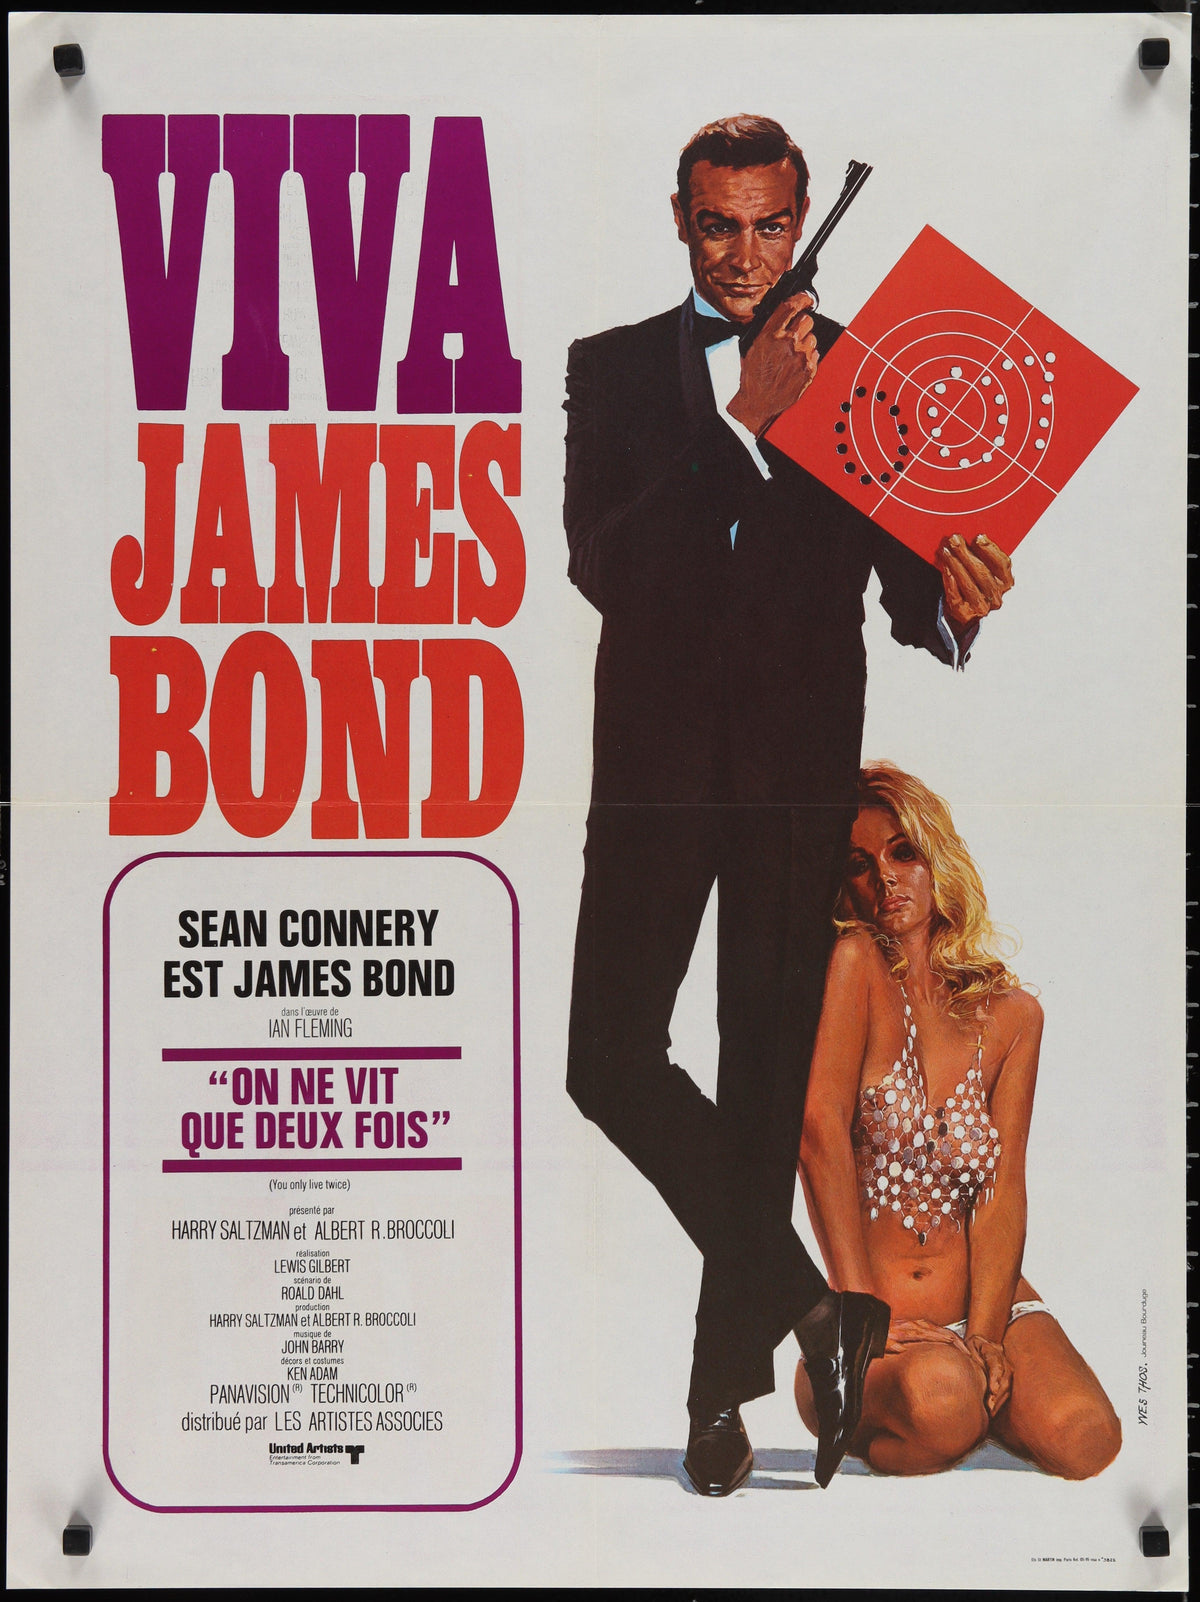 You Only Live Twice / Viva James Bond French Small (23x32) Original Vintage Movie Poster